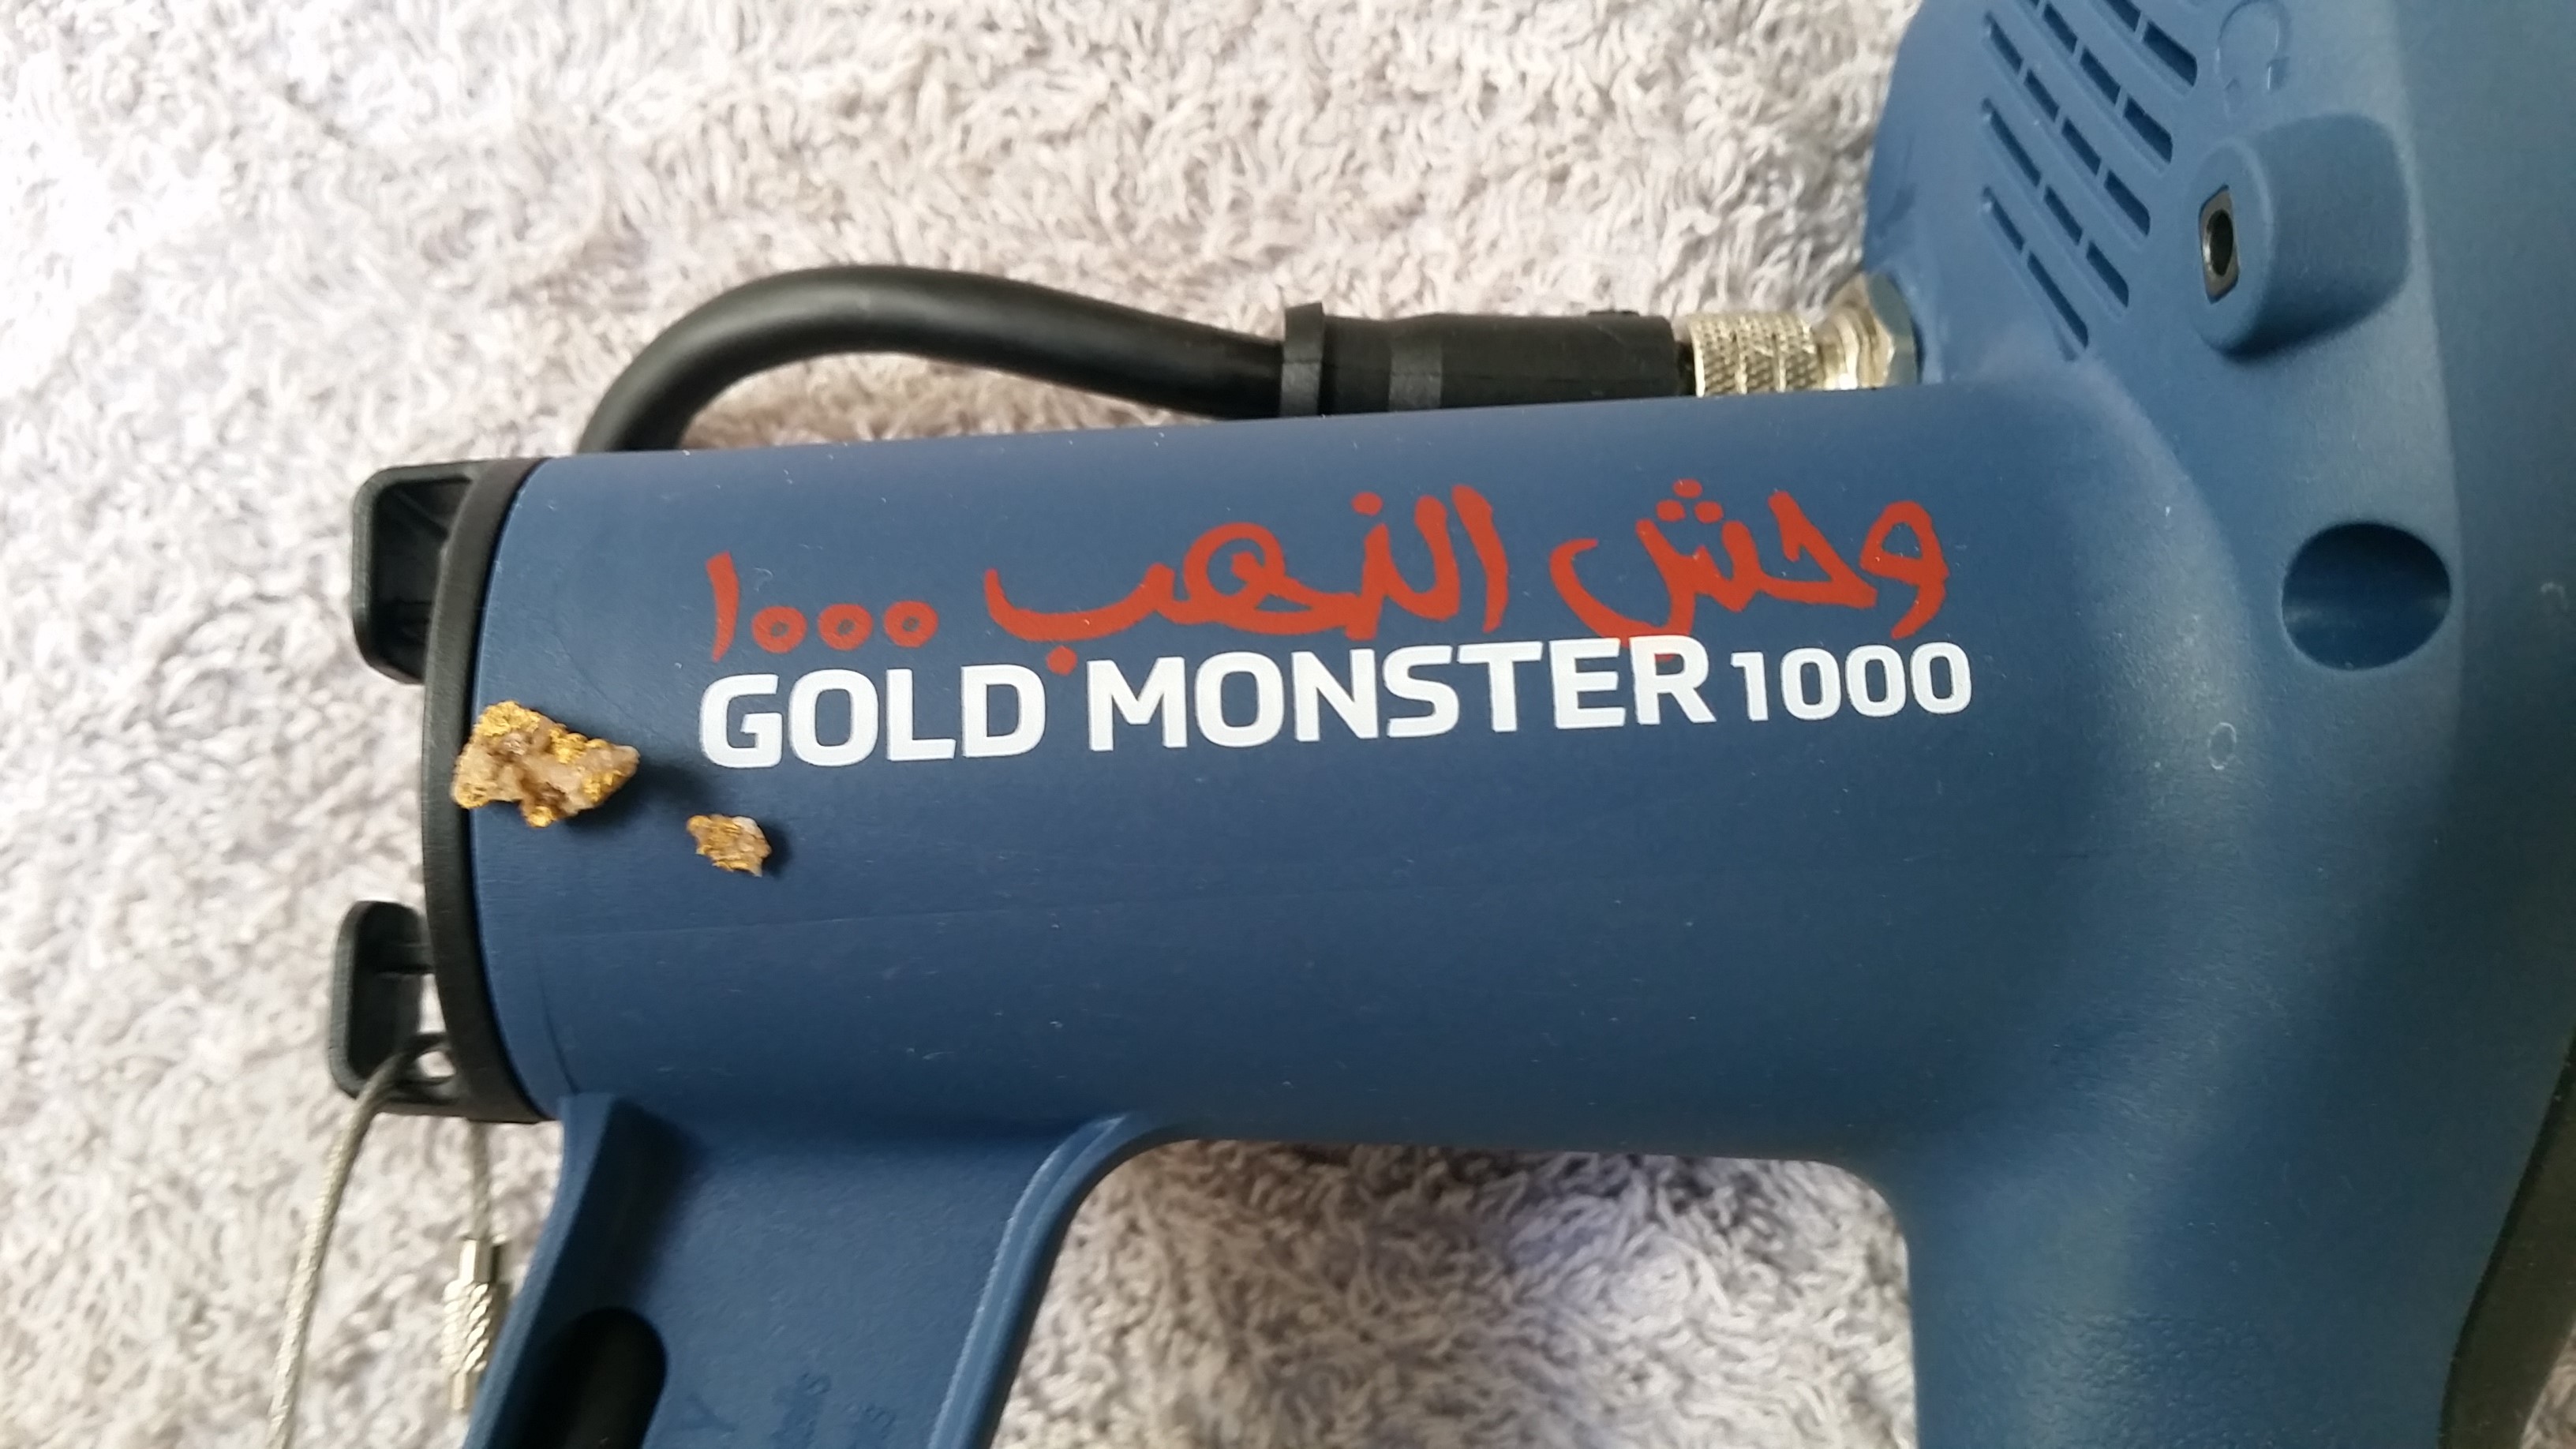 My first weekend with the GOLD MONSTER 1000